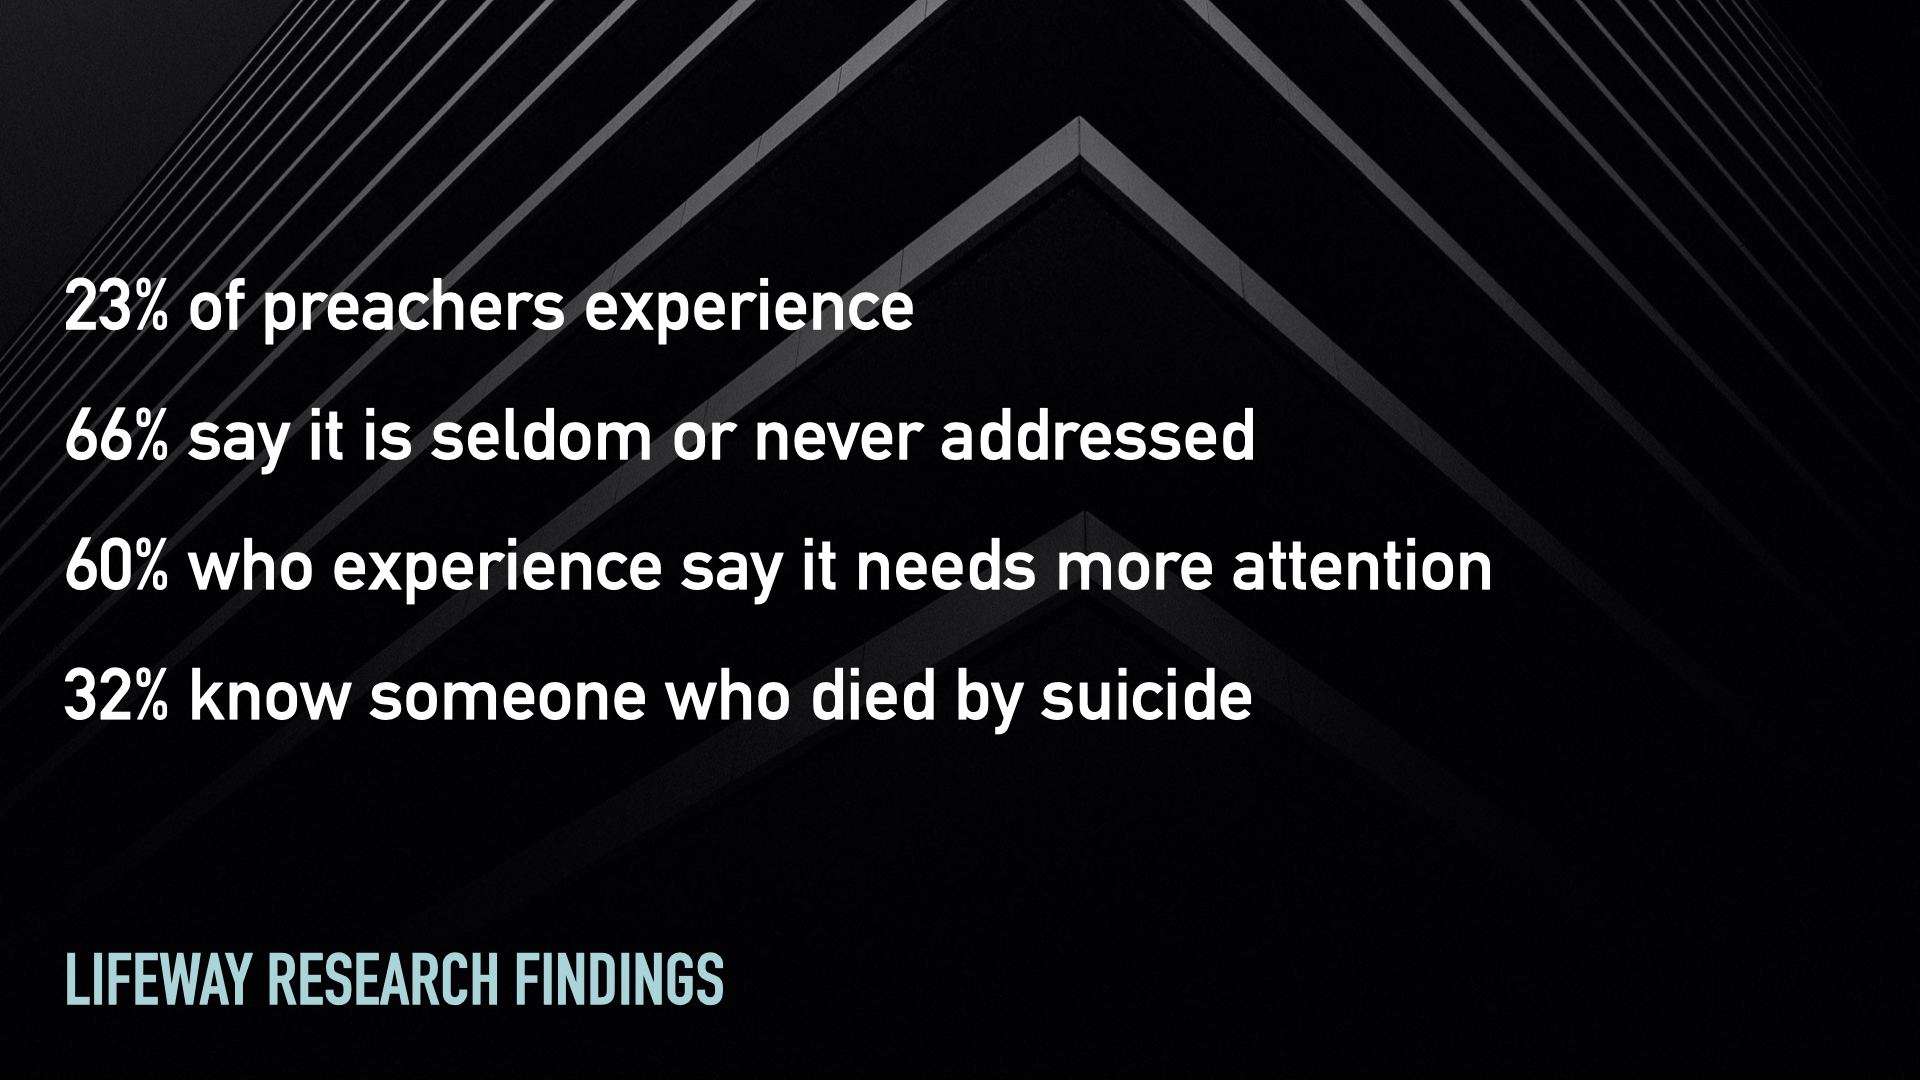 slide with research summary about Christians and depression